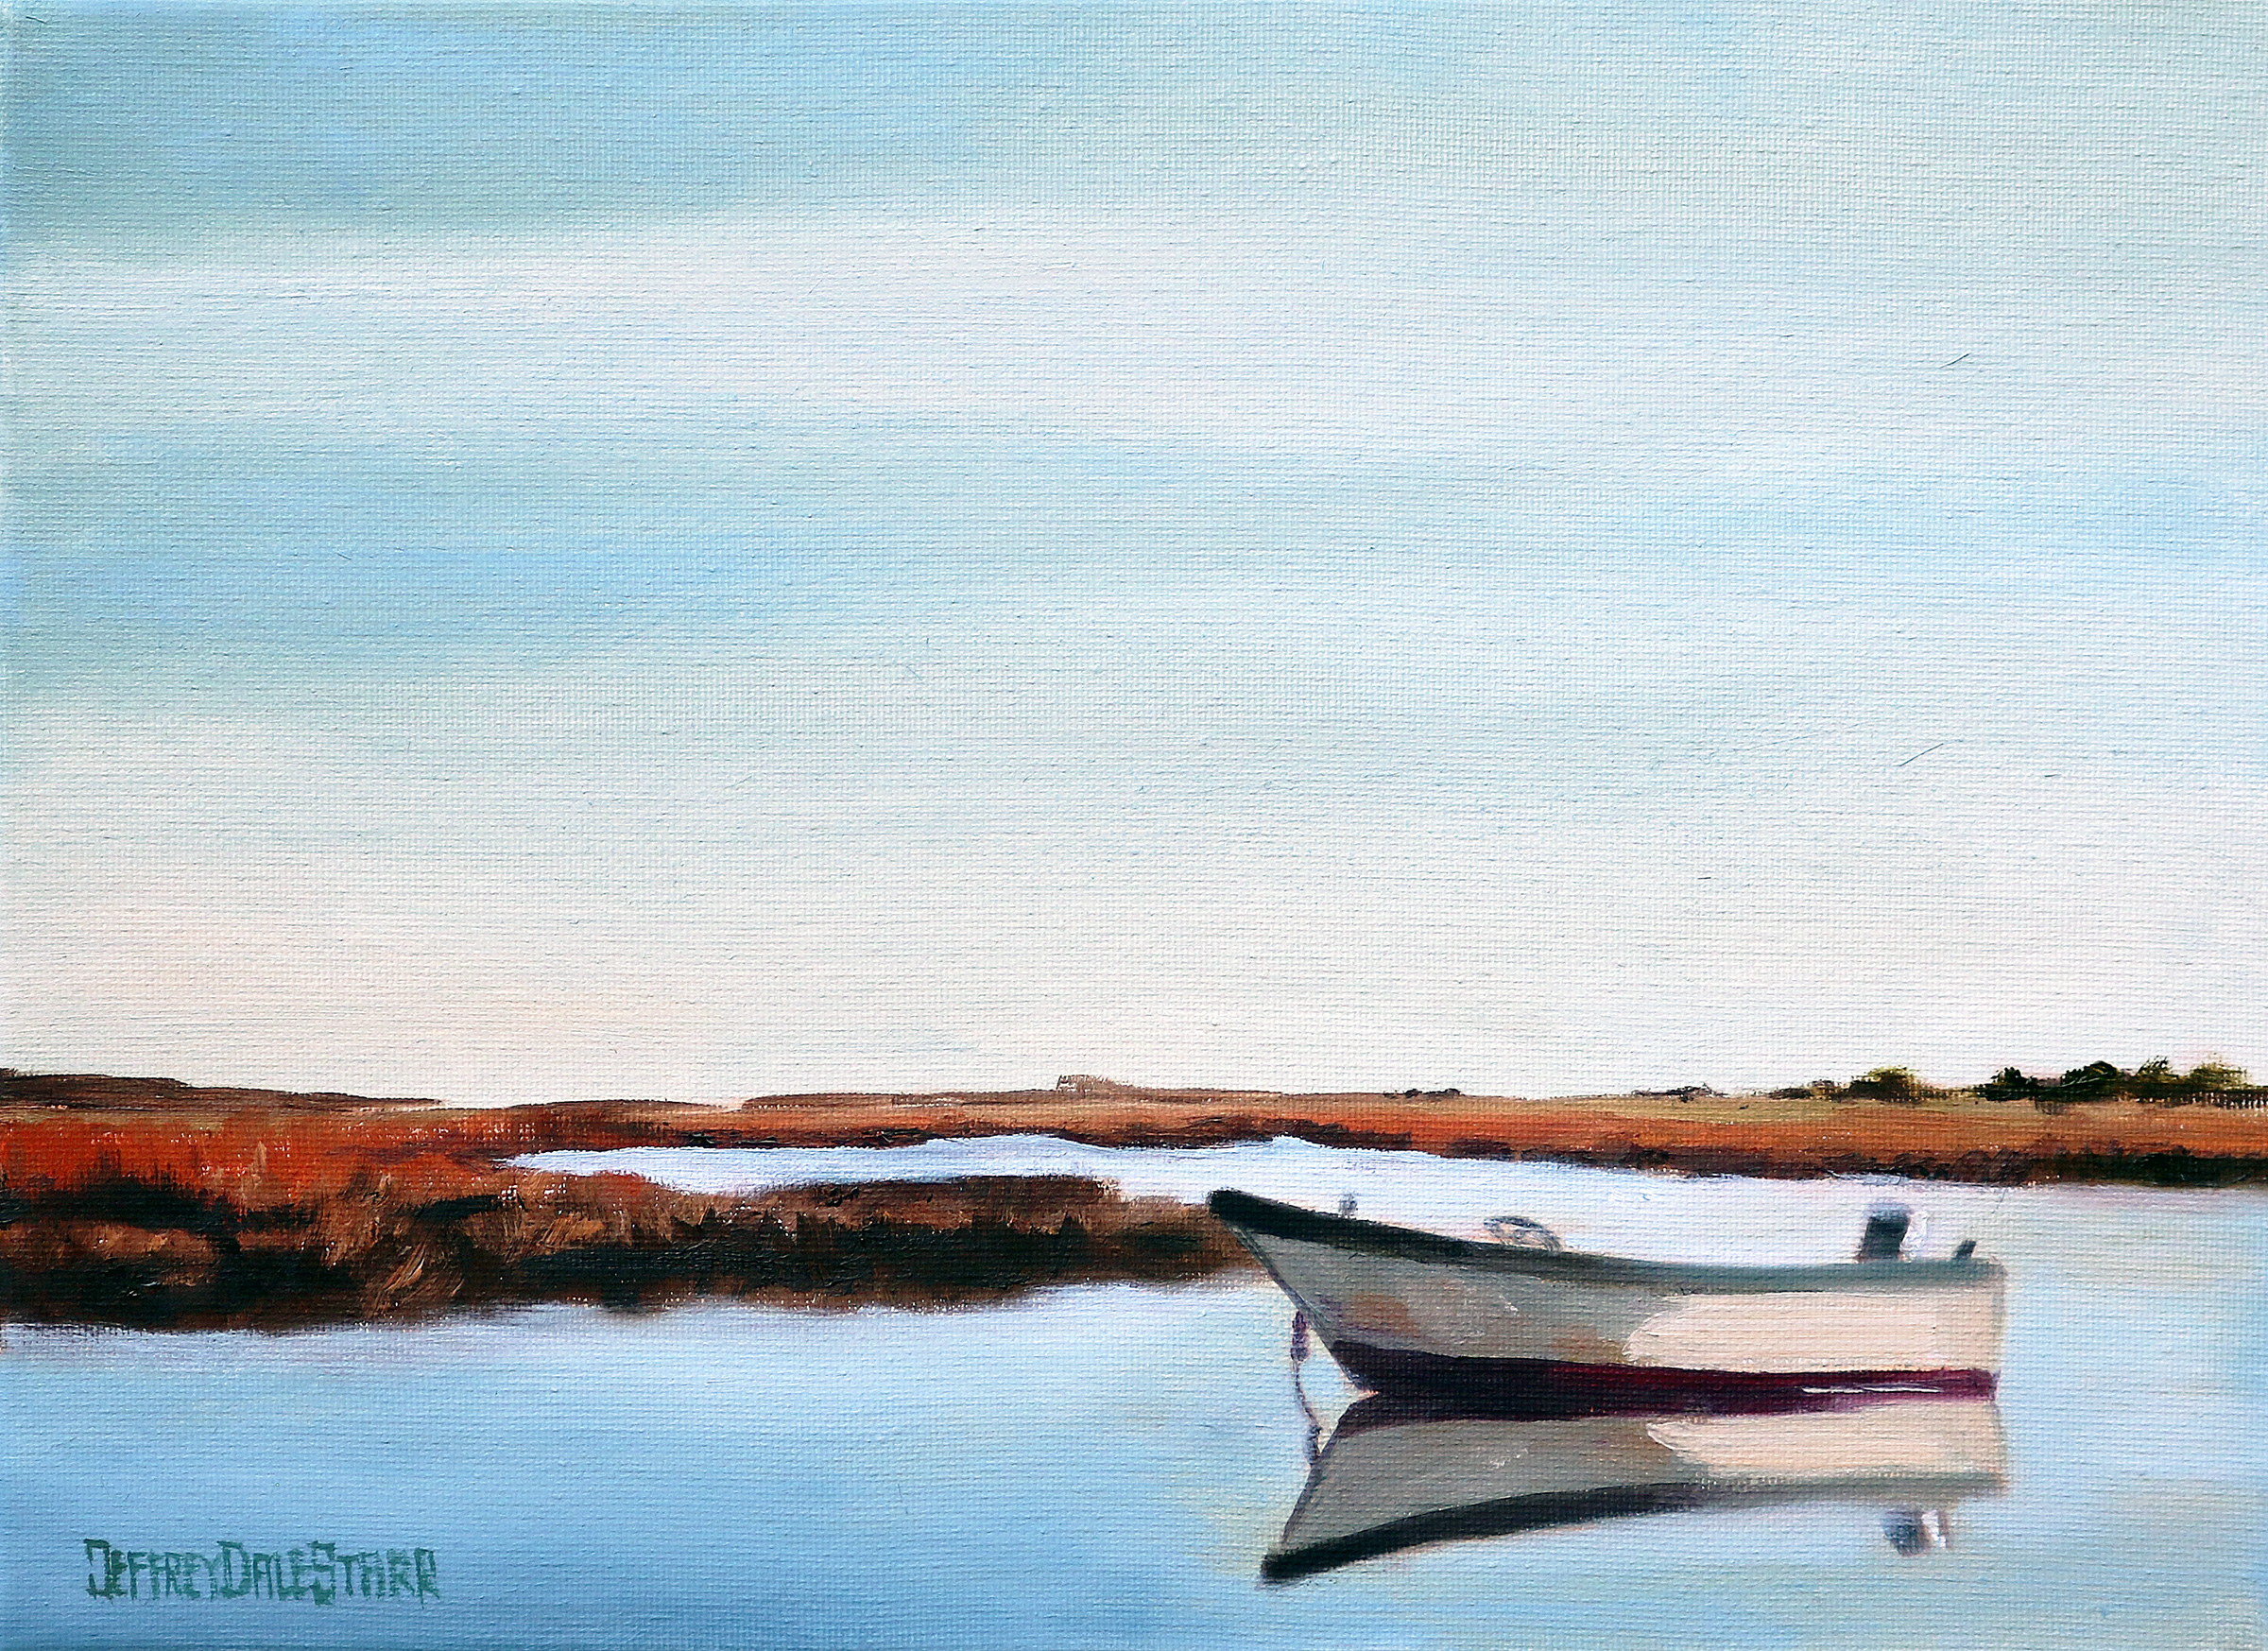 Oil painting "Morning on the Marsh" by Jeffrey Dale Starr